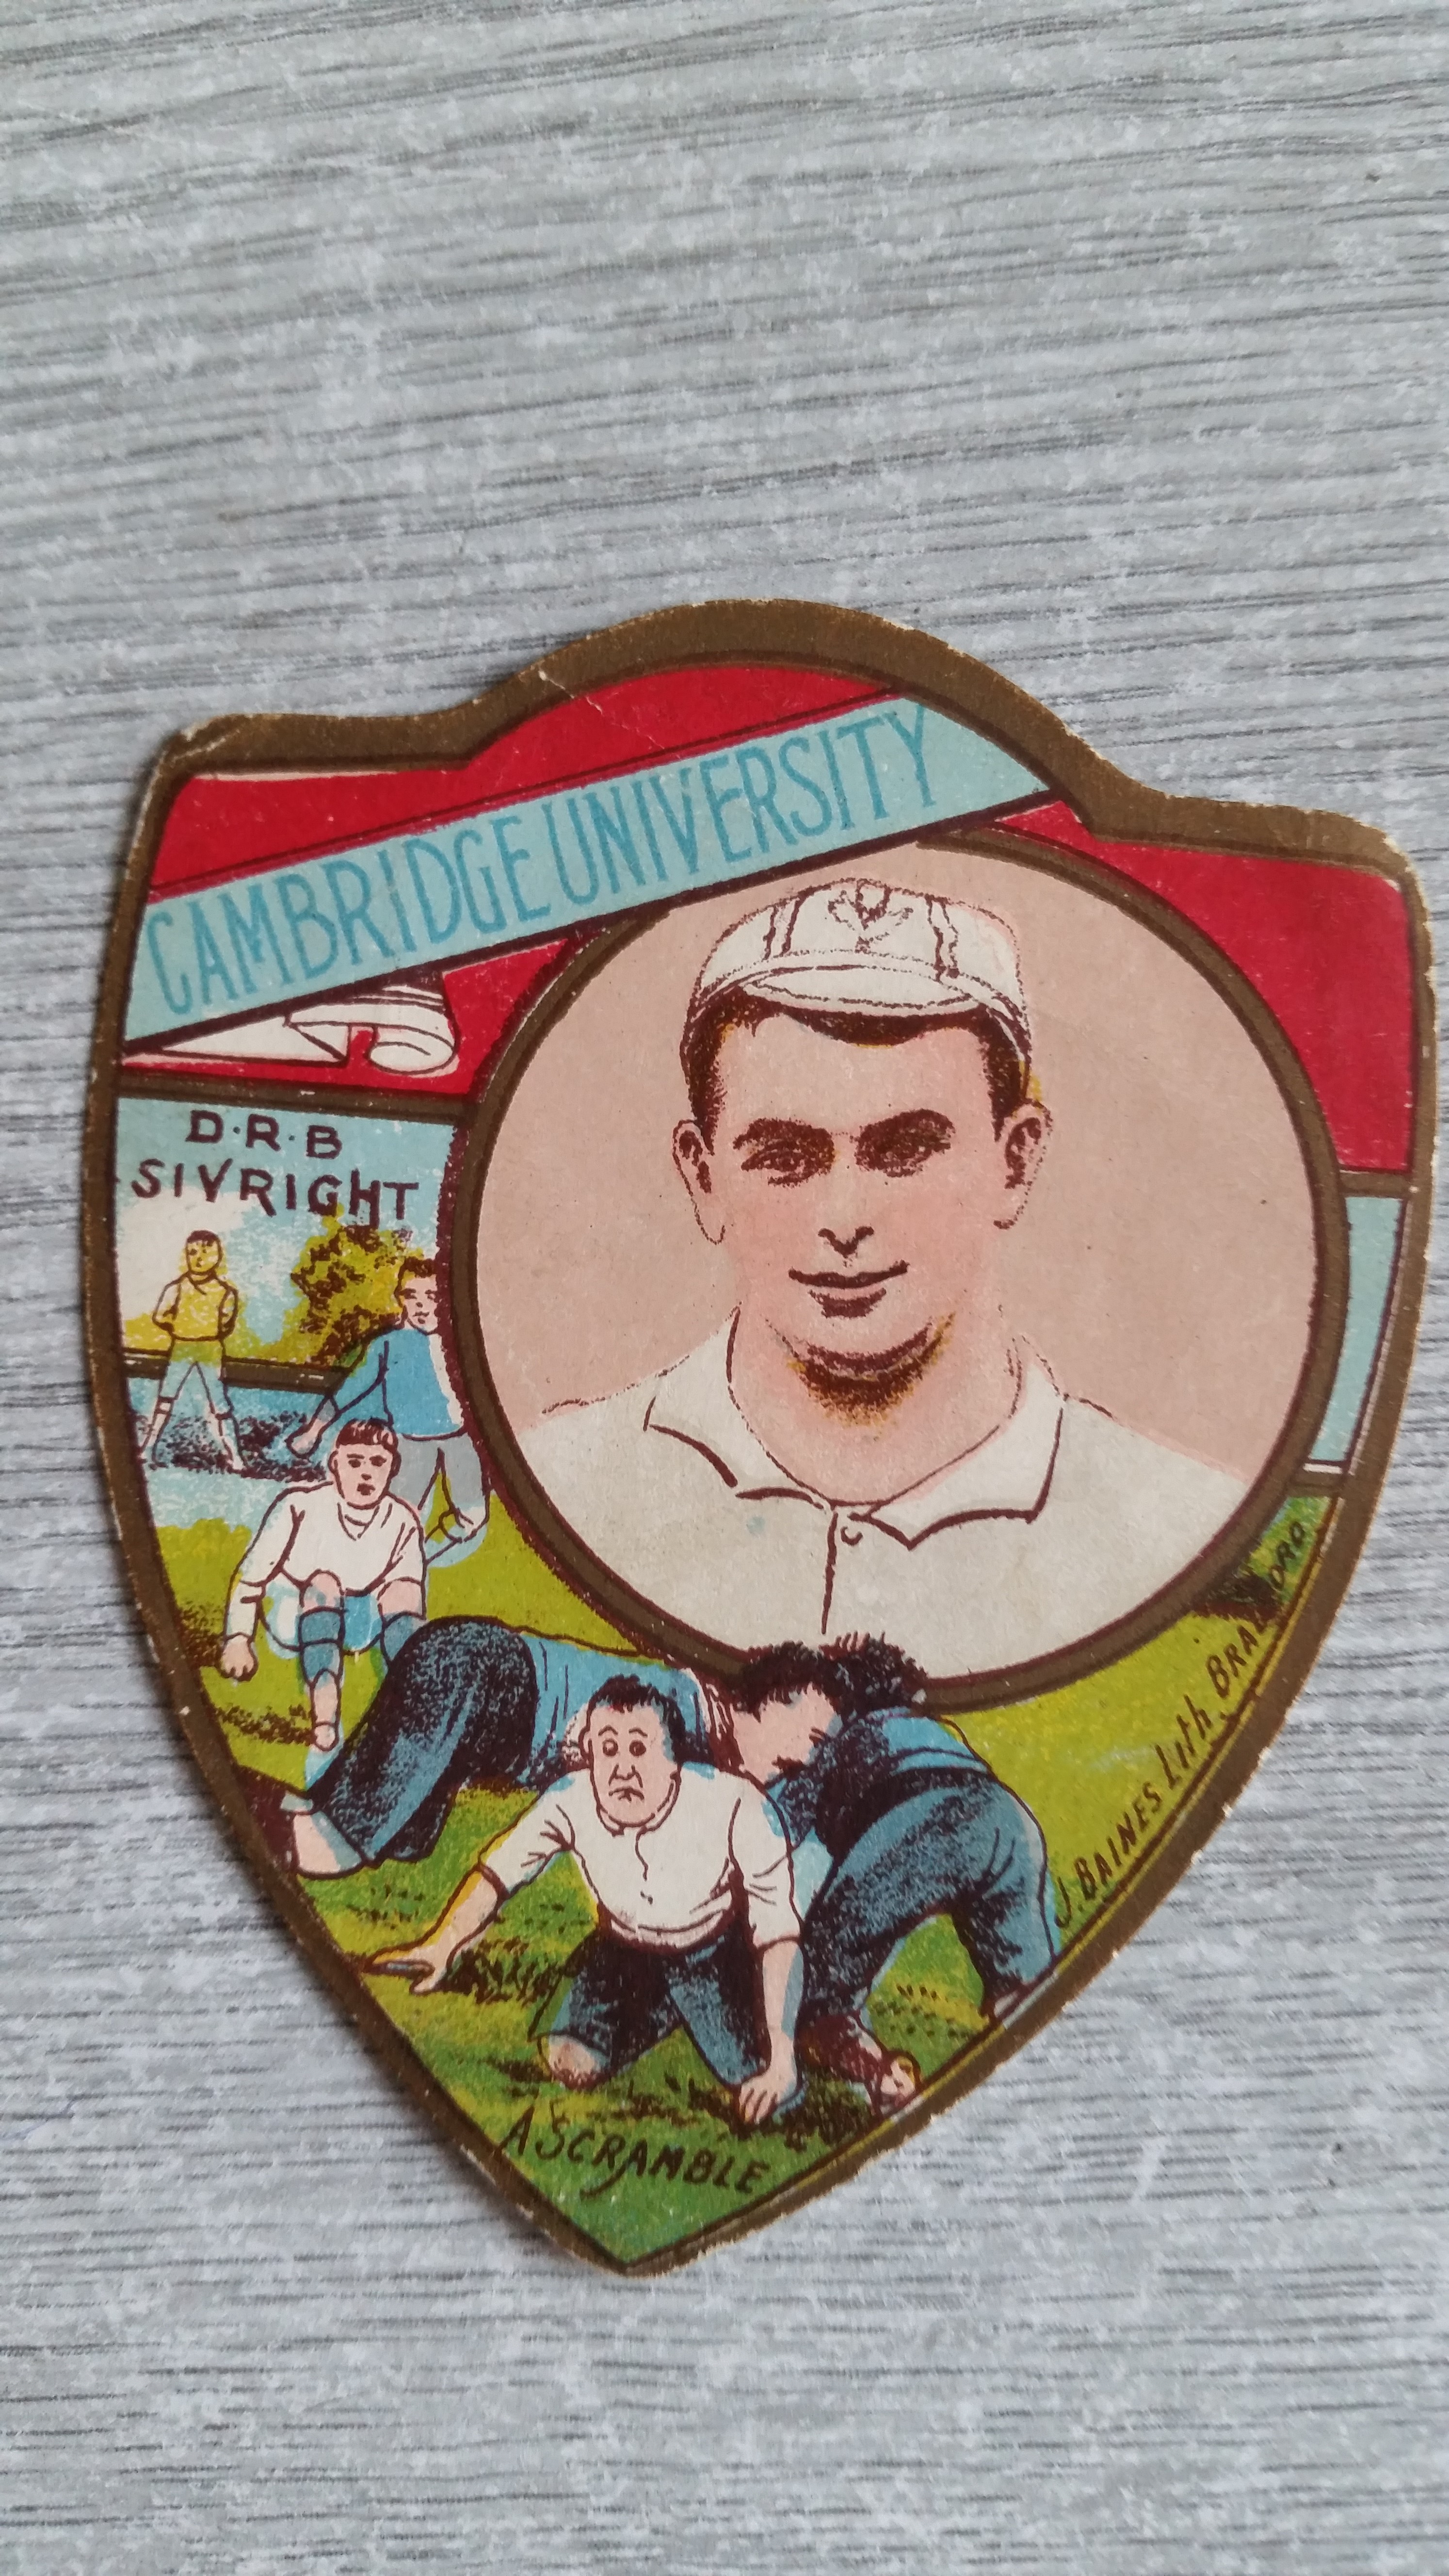 BAINES, shield-shaped rugby card, Cambridge University, D.R.B. Sivright inset, knocks to edges, G